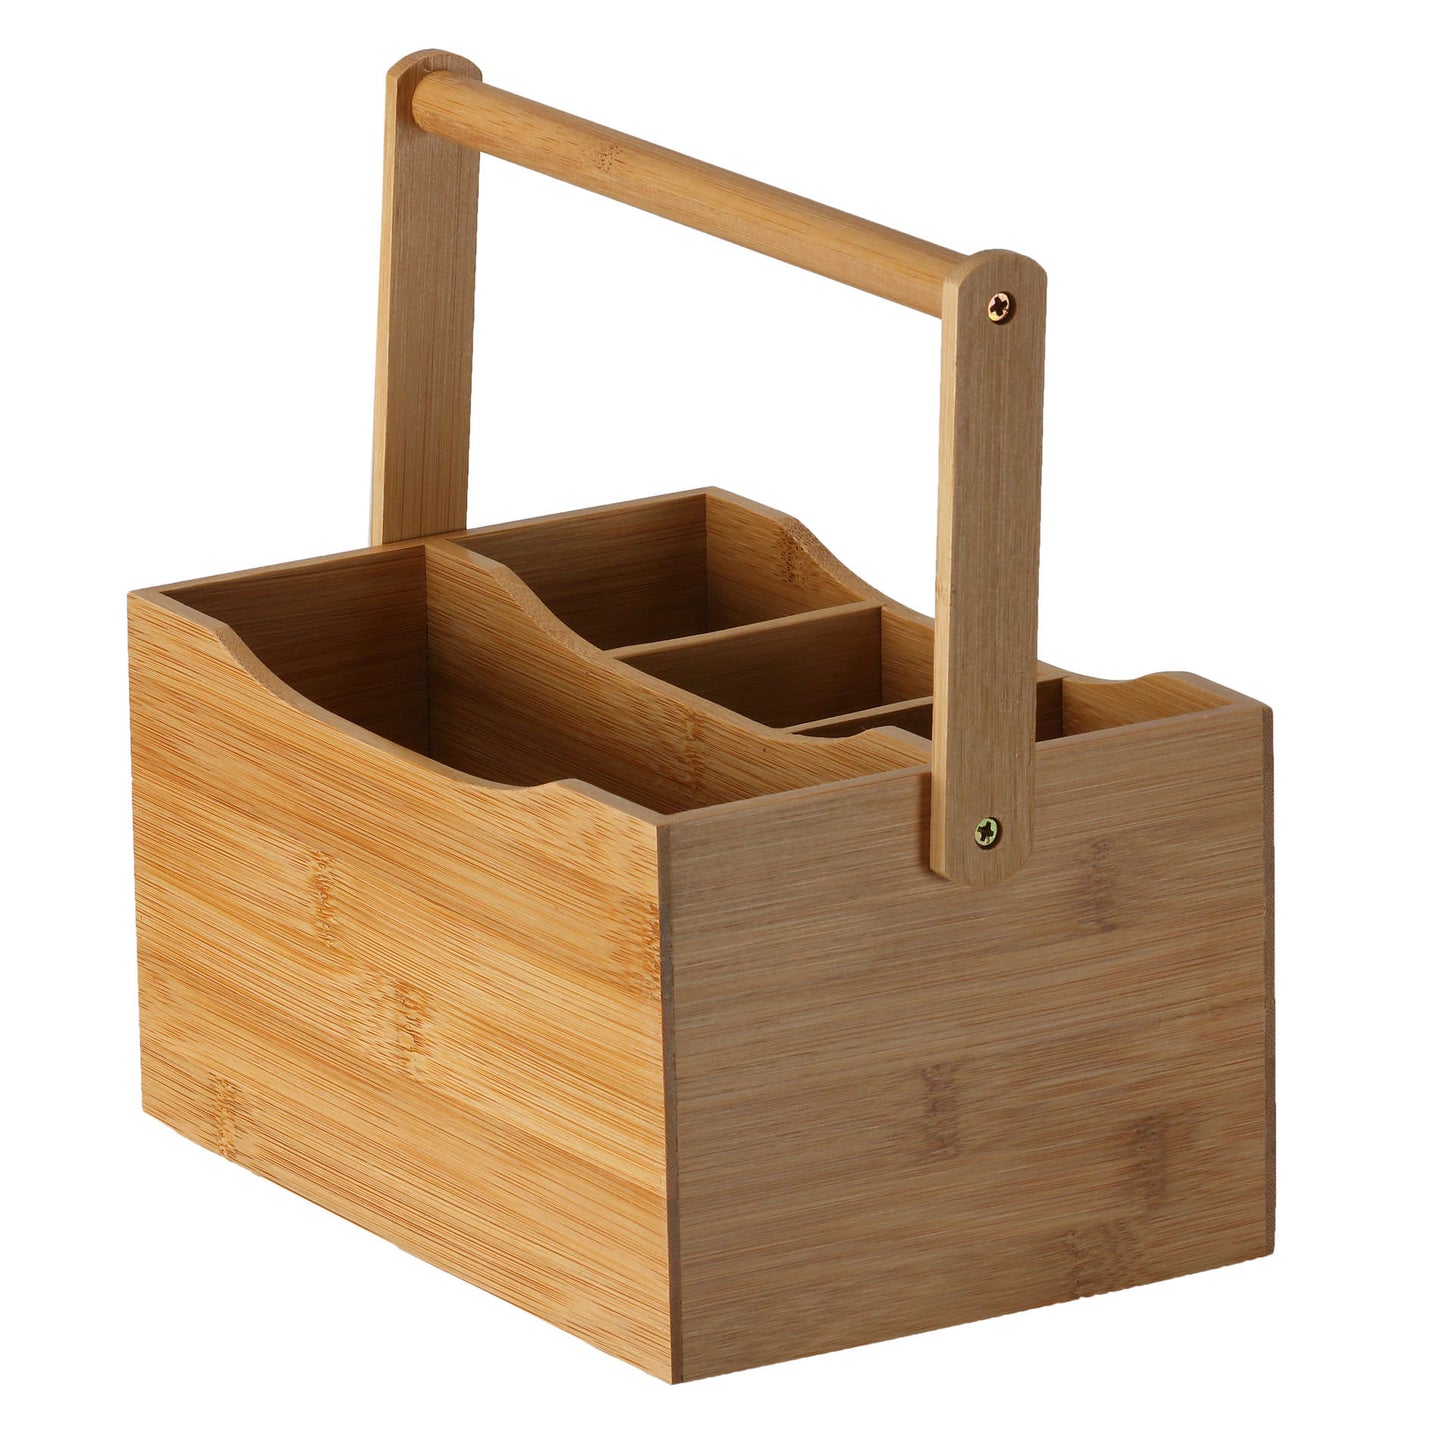 Cortesi Home Kira Natural Bamboo Cutlery Caddy Tabletop Holder with Handle and 4 Compartments